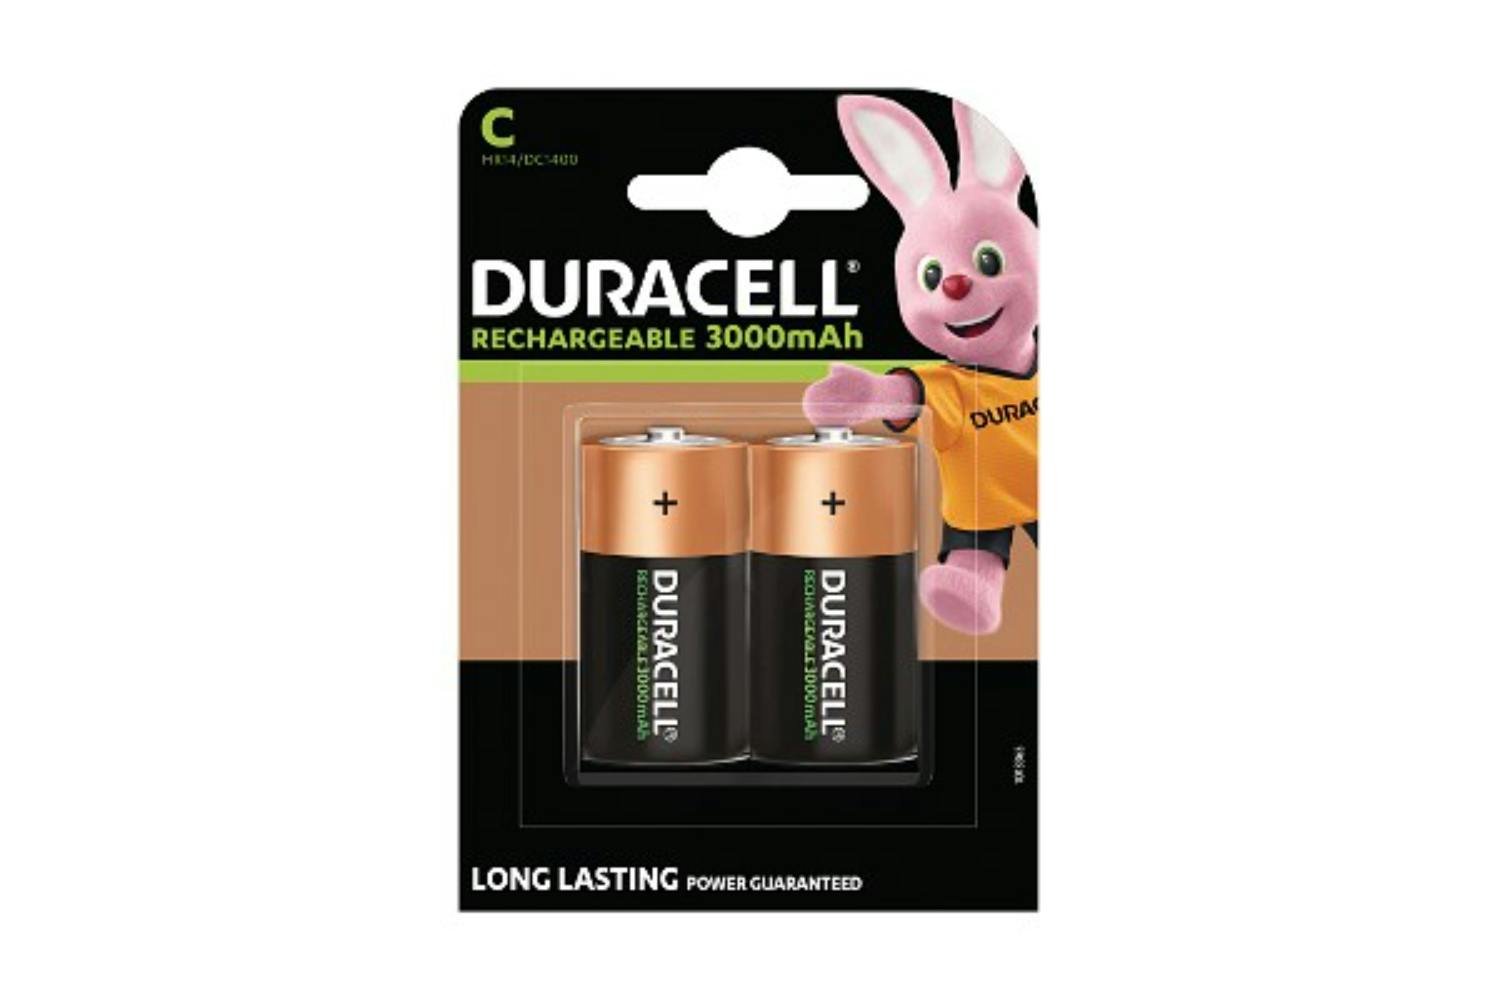 Duracell Rechargeable C Cell - 2 Pack